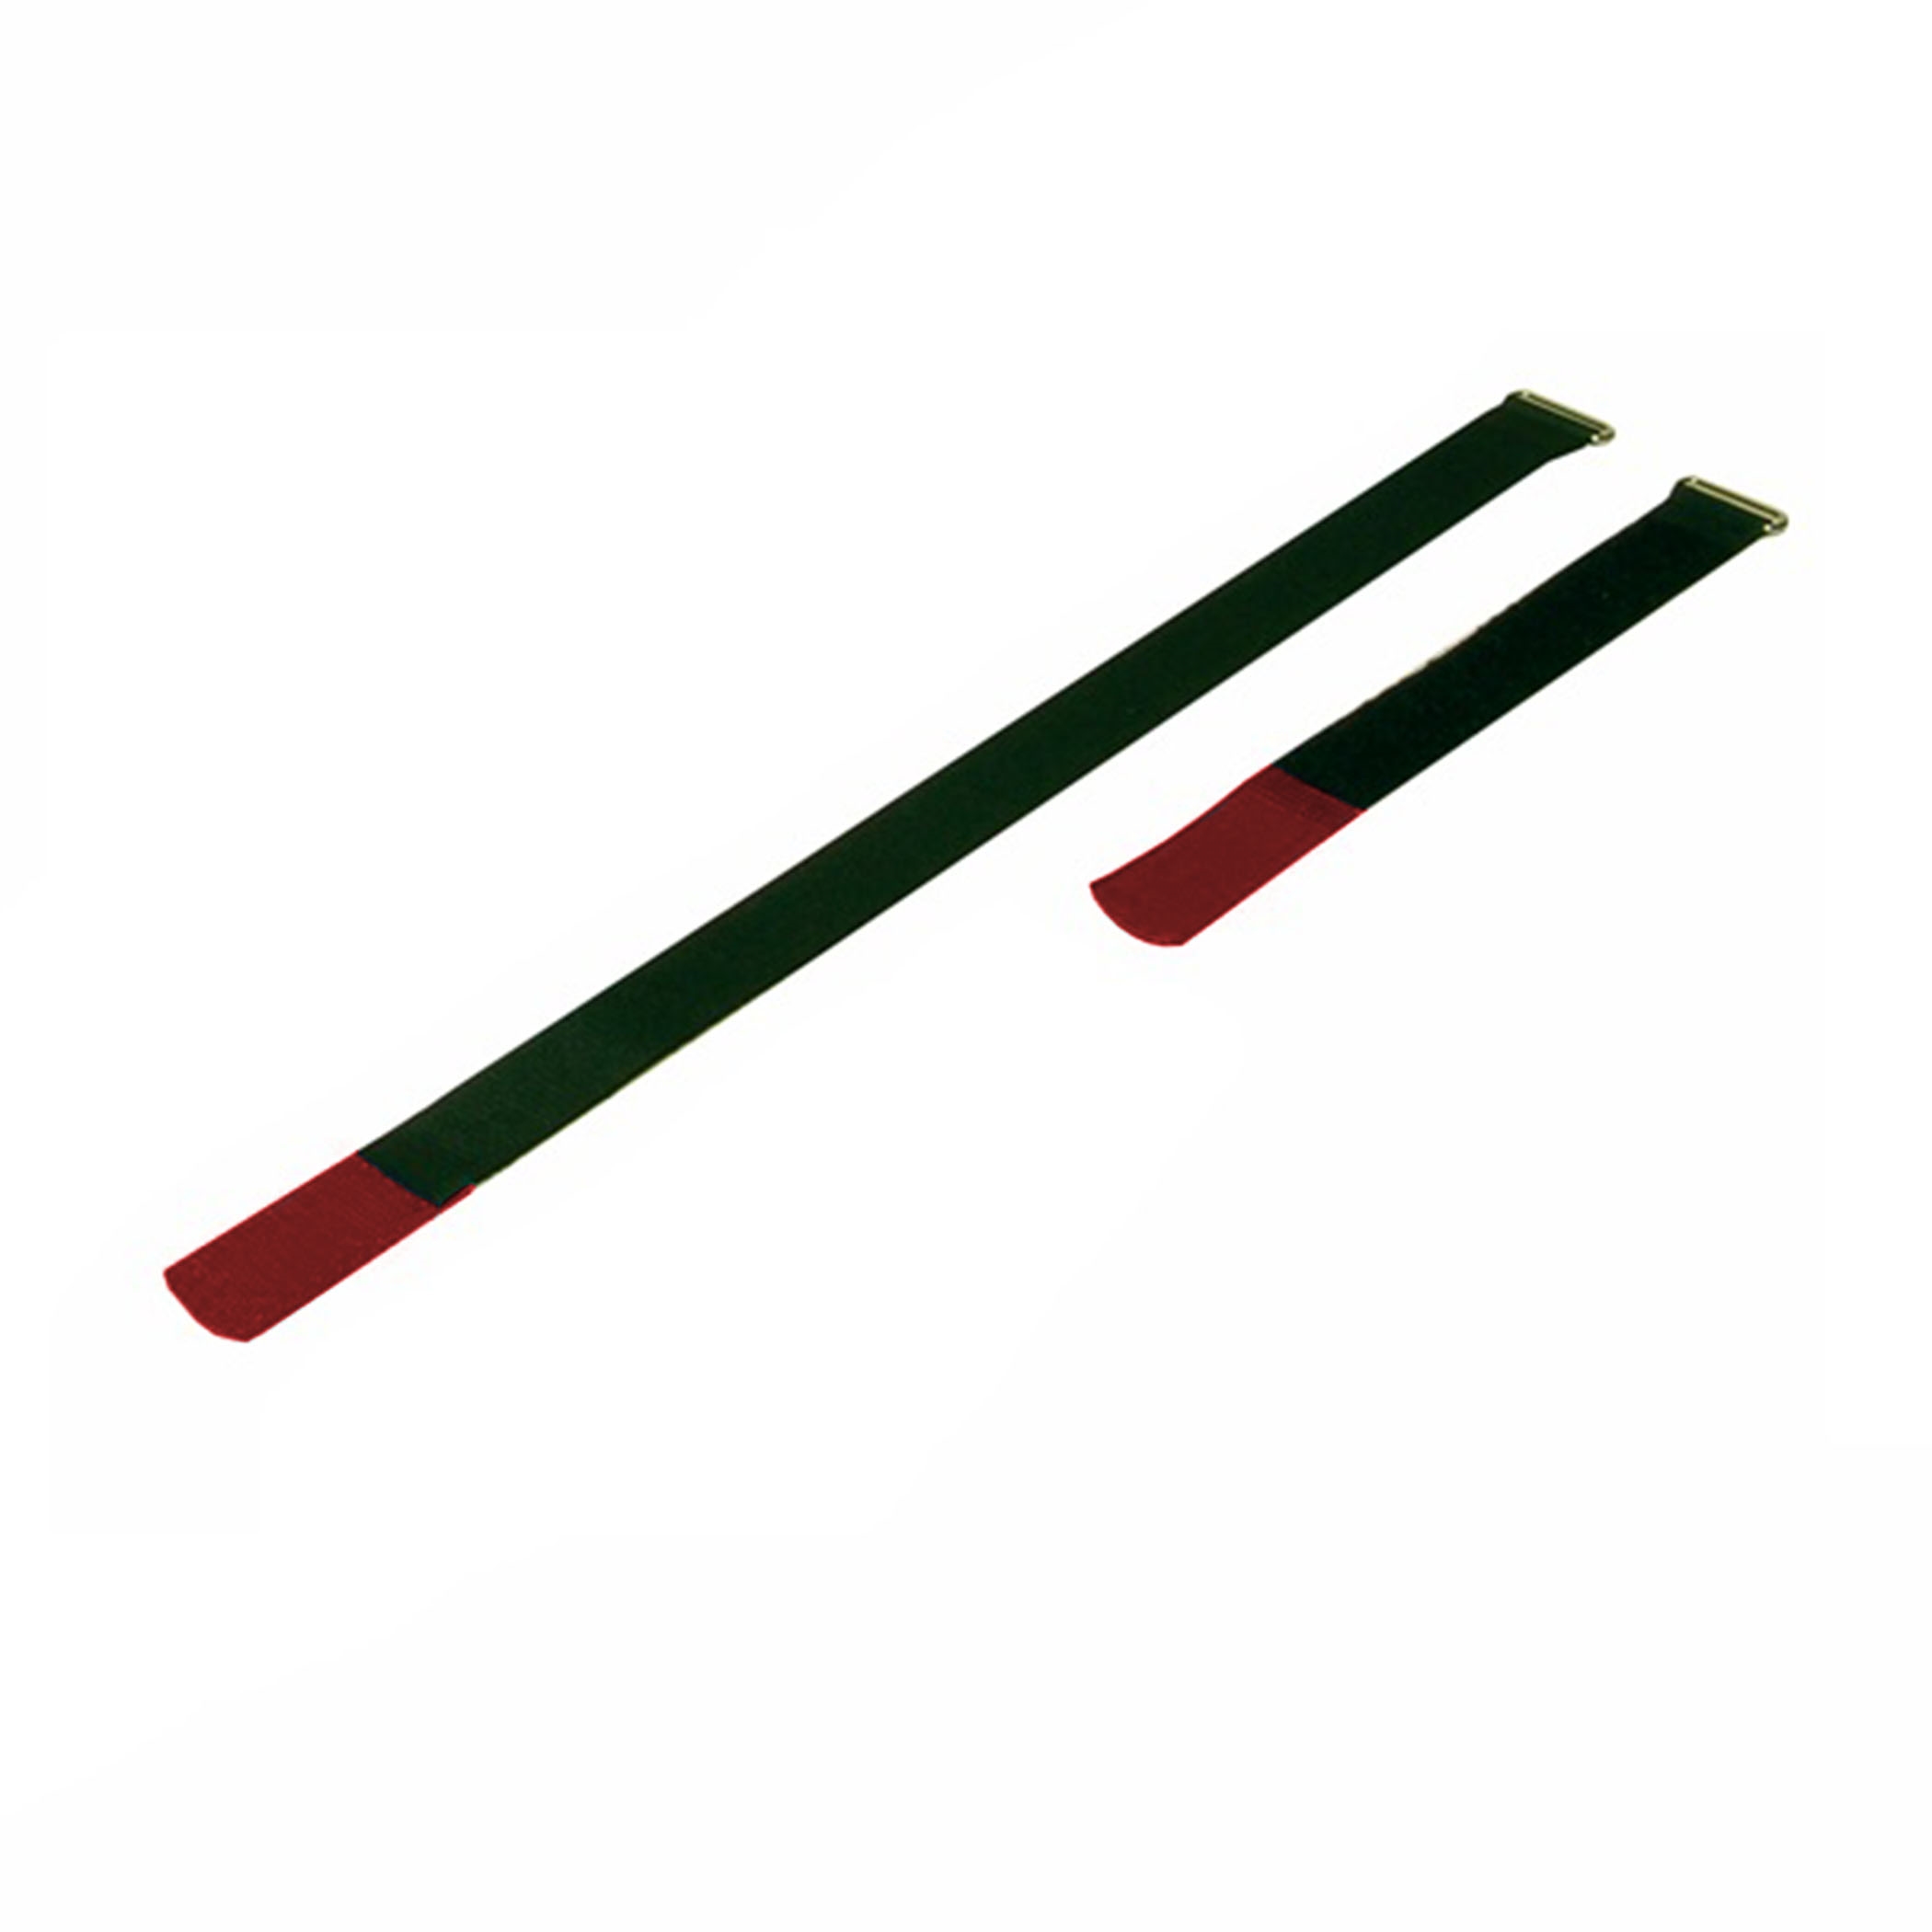 Cable Tie 410x25mm with Hook Red, (10 pieces) - a2541-600h